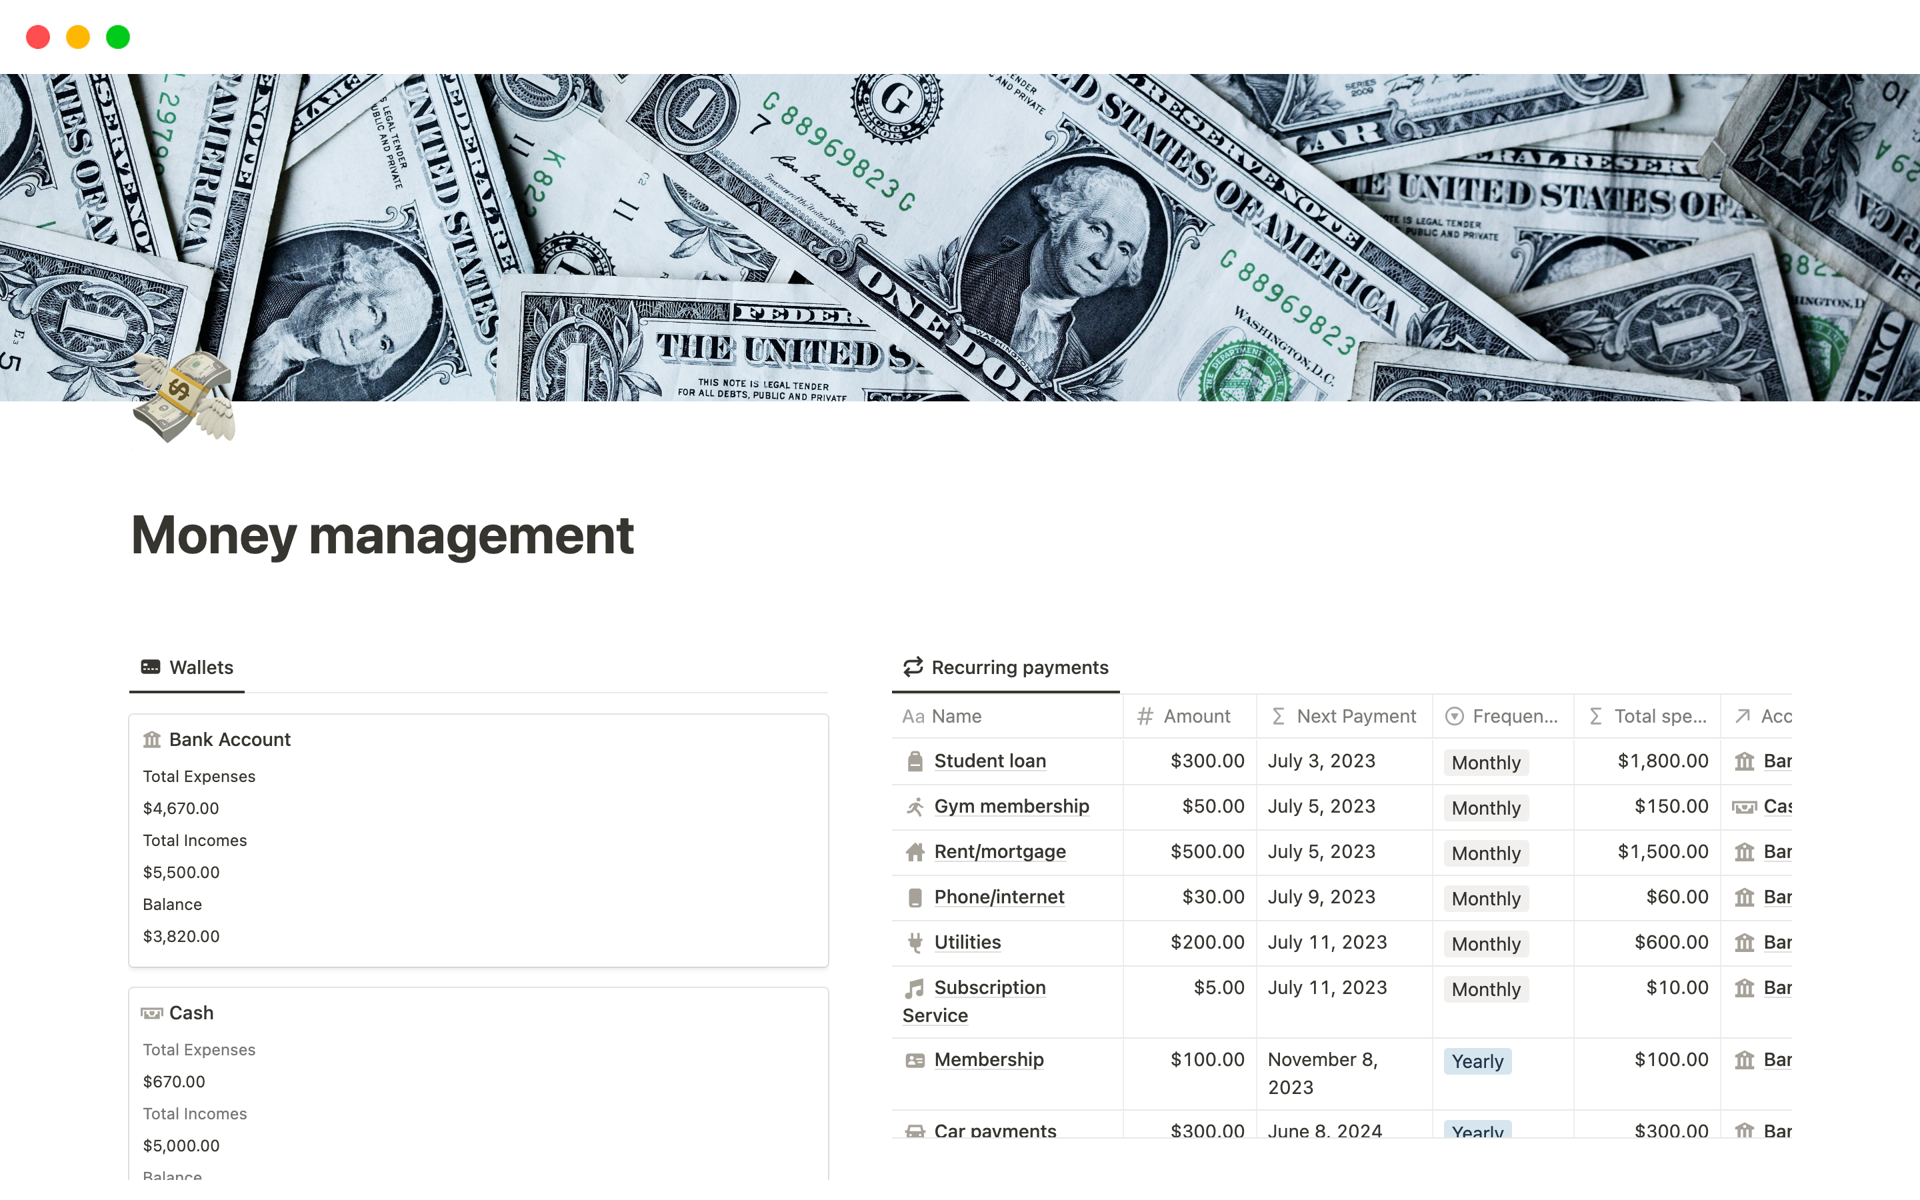 Effortlessly manage your finances with our comprehensive Notion template that combines budgeting, expense tracking, and financial analysis into a single, intuitive solution.